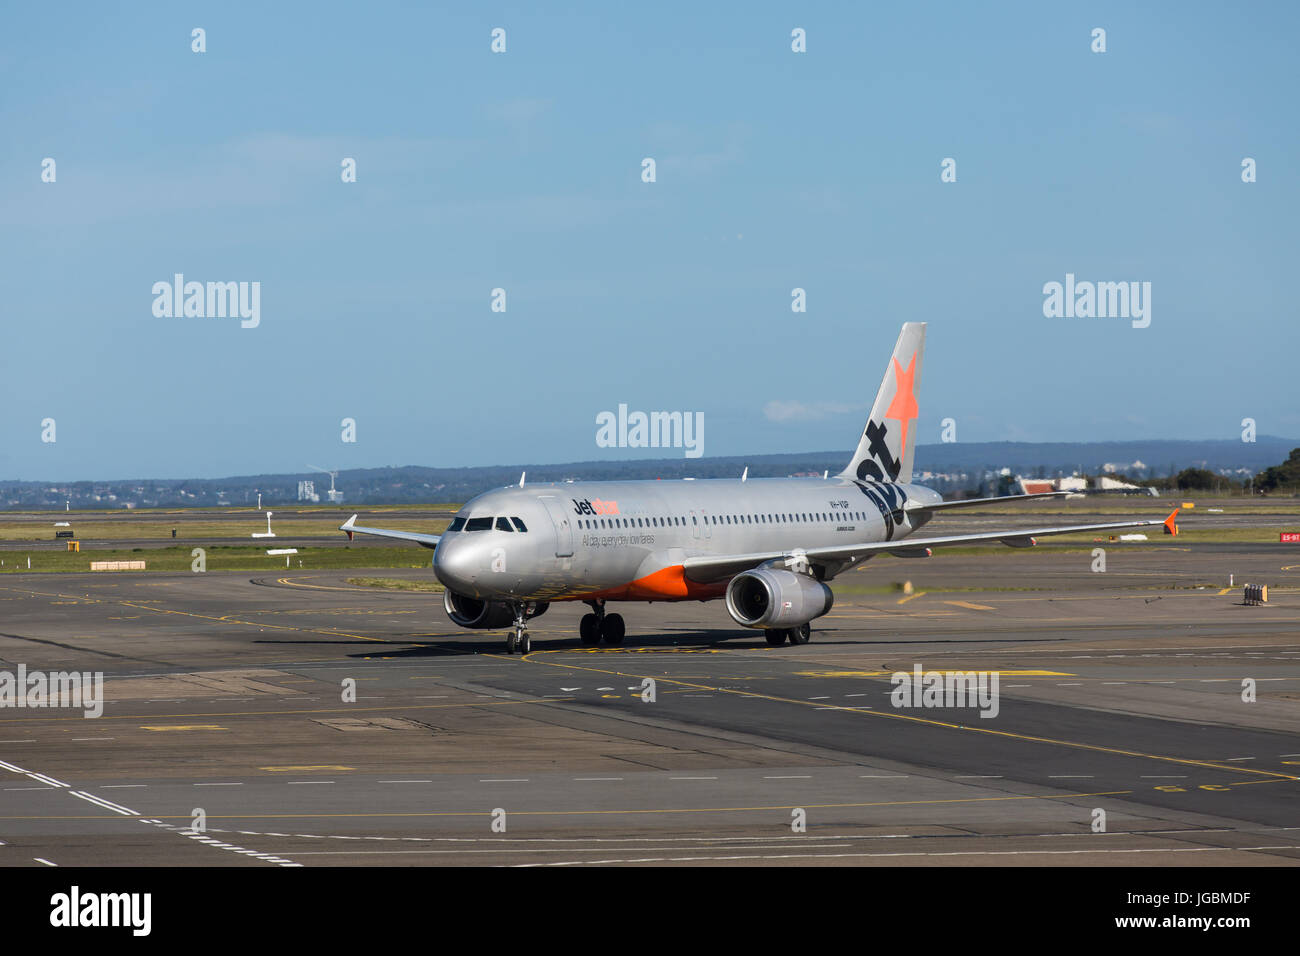 An airliner comes in to the airport terminal Stock Photo